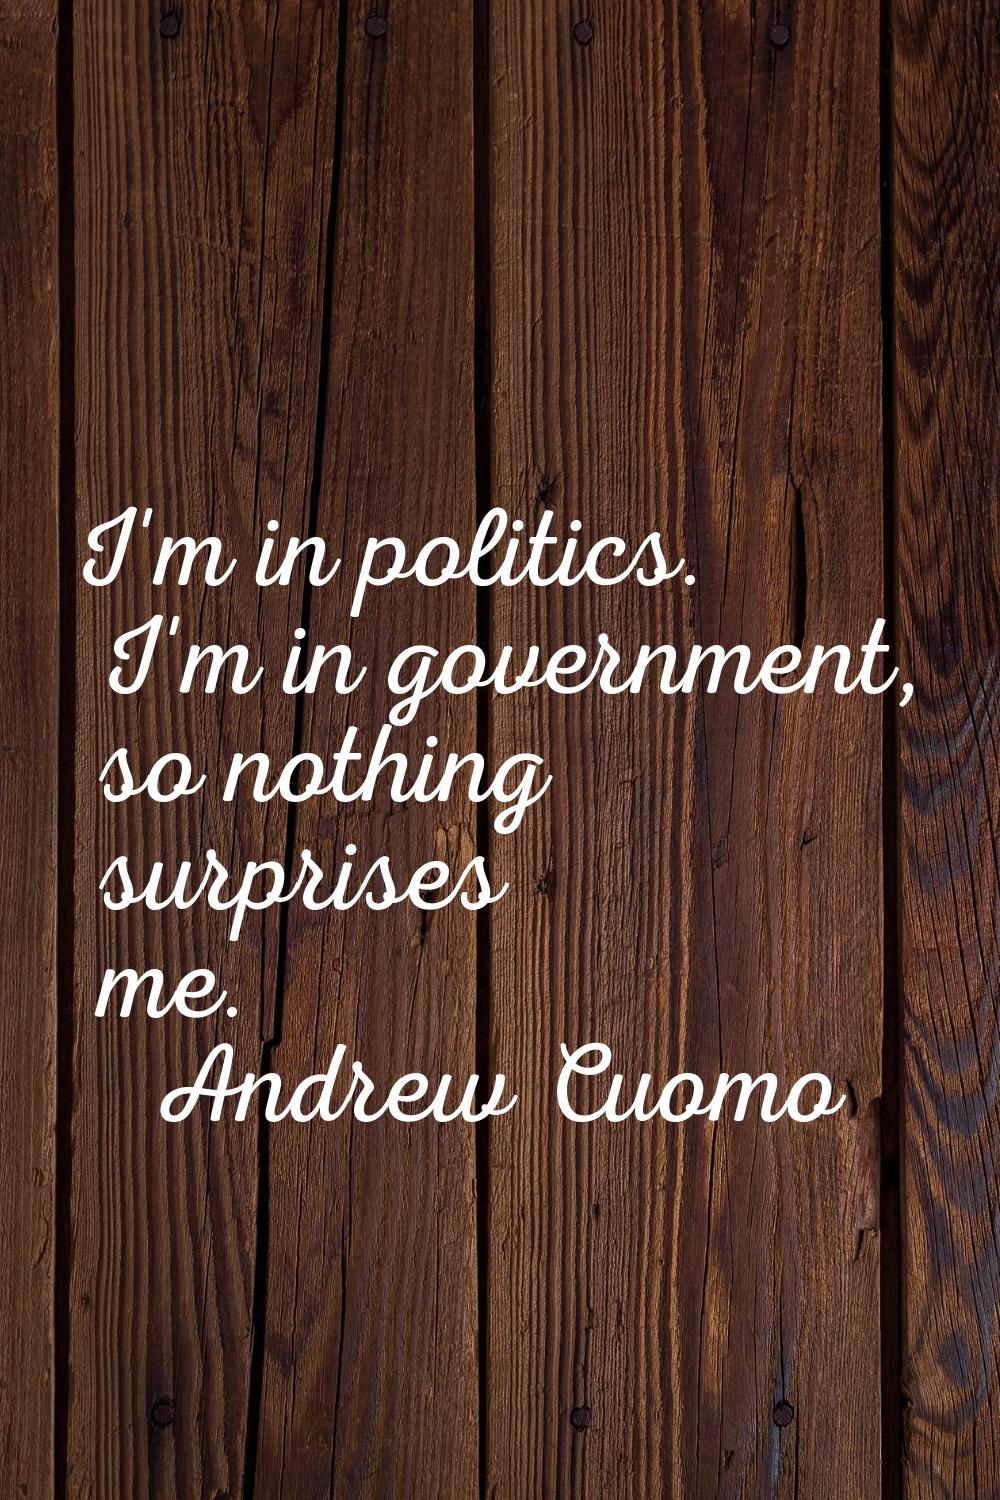 I'm in politics. I'm in government, so nothing surprises me.